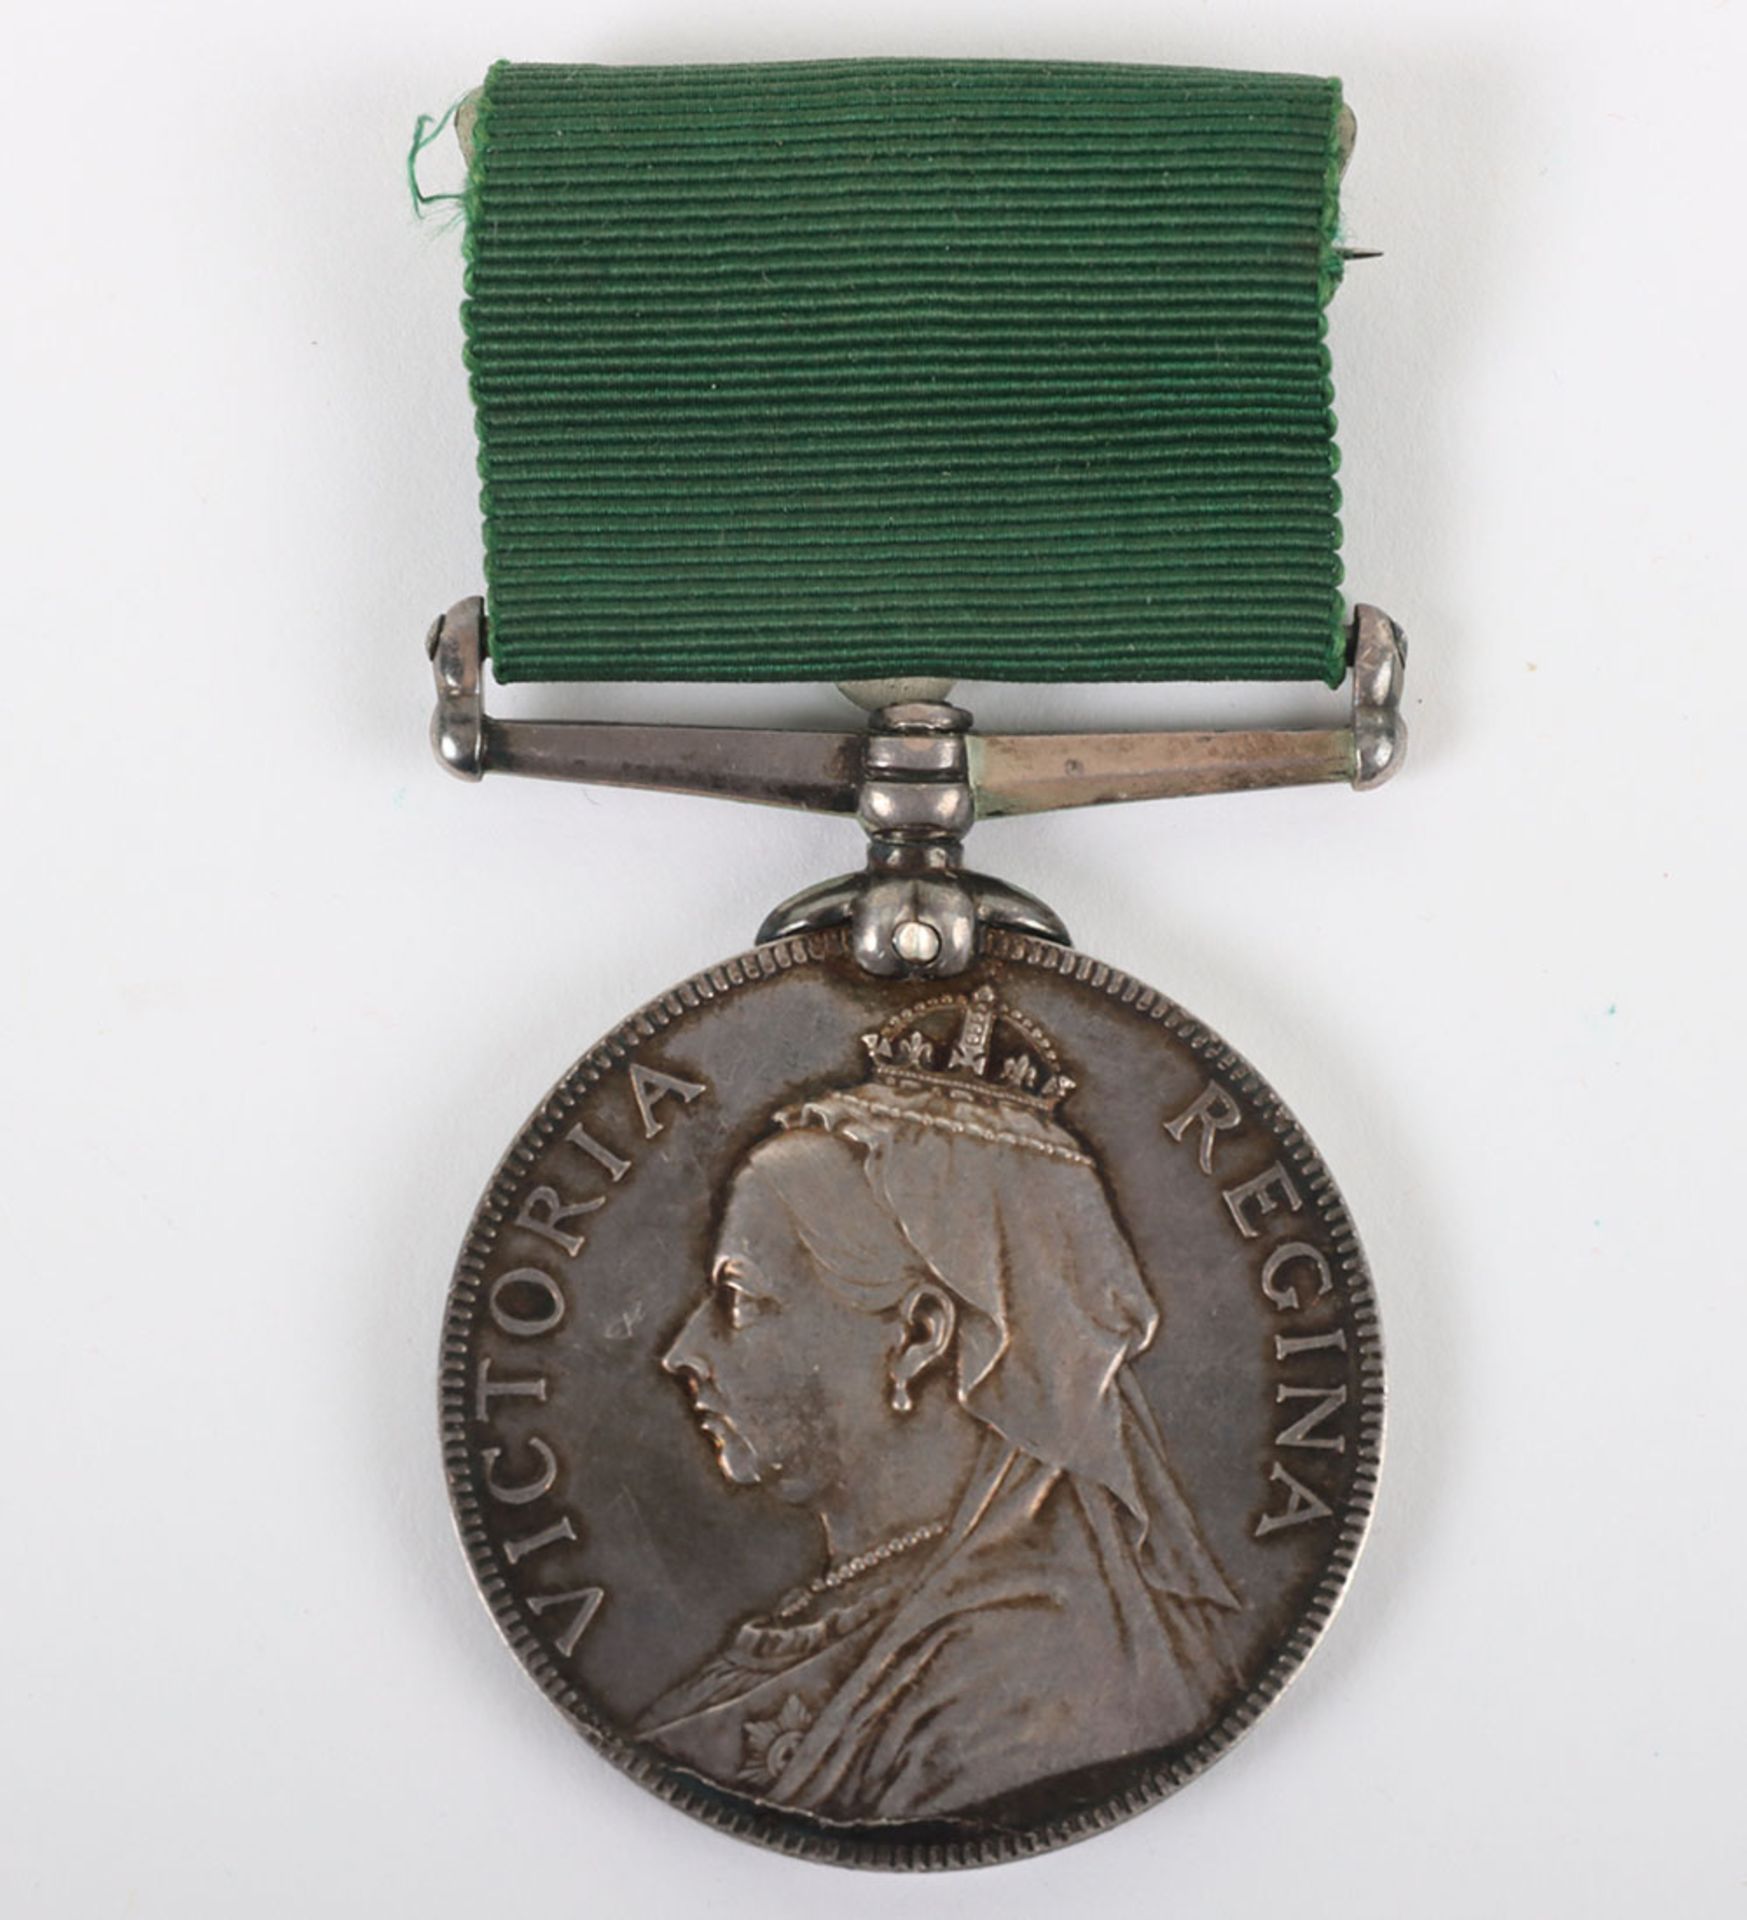 A Victorian Volunteer Long Service Medal to a Colour Serjeant in the 2nd Middlesex Rifle Volunteer C